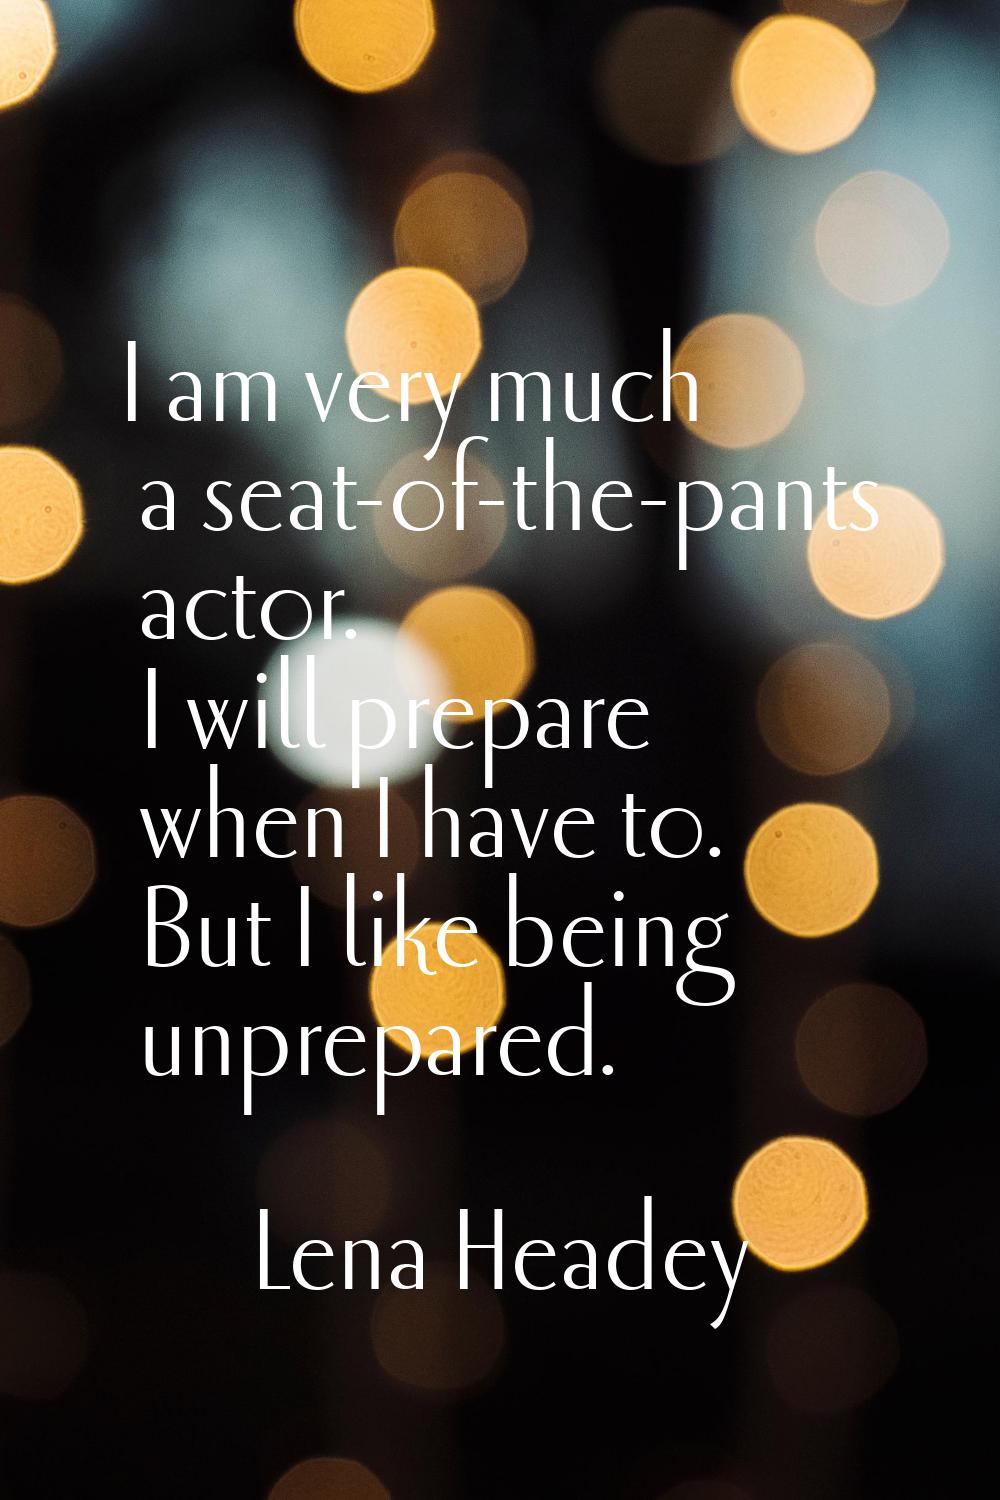 I am very much a seat-of-the-pants actor. I will prepare when I have to. But I like being unprepare